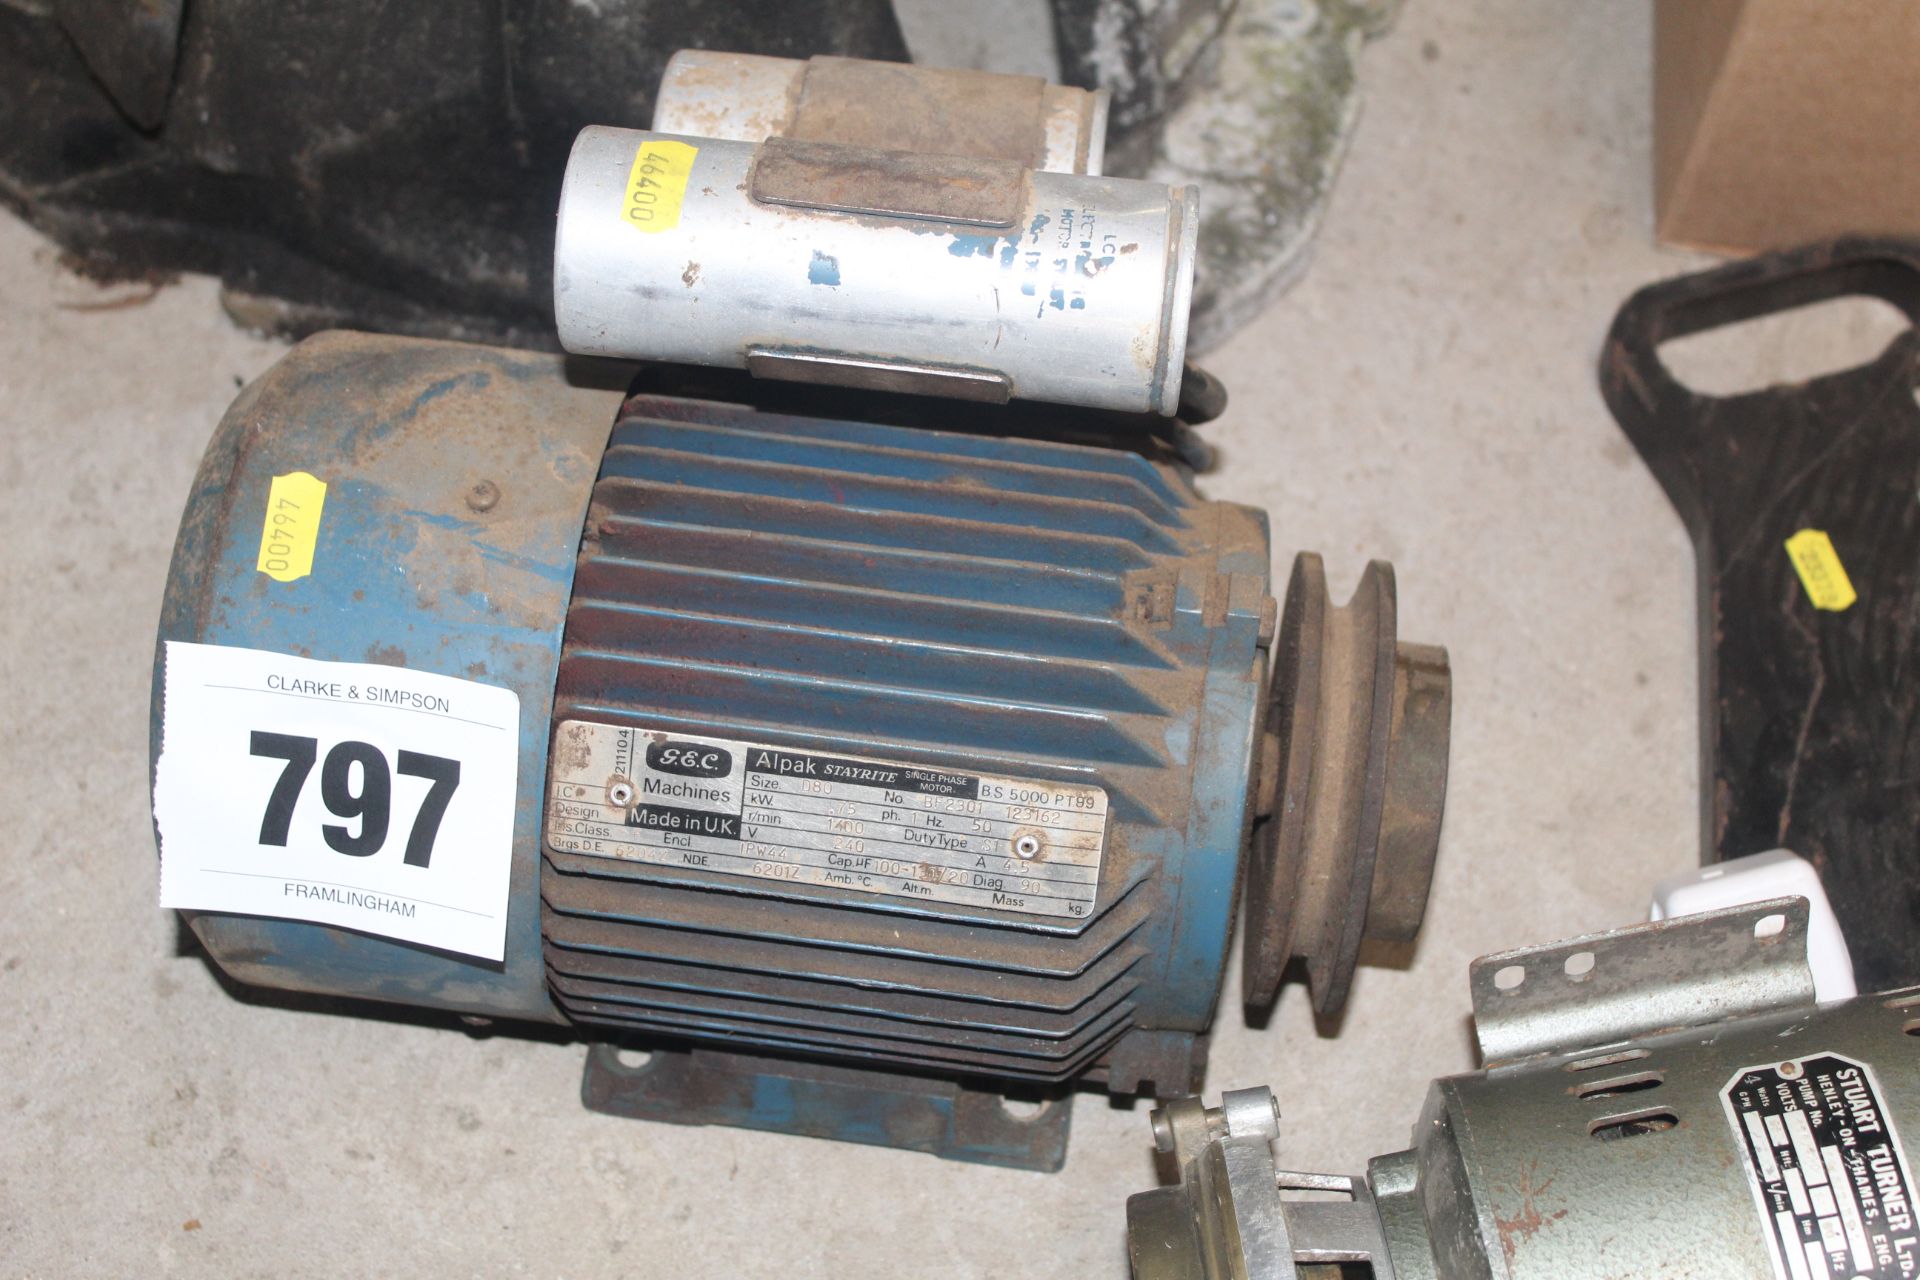 0.75kw electric motor.